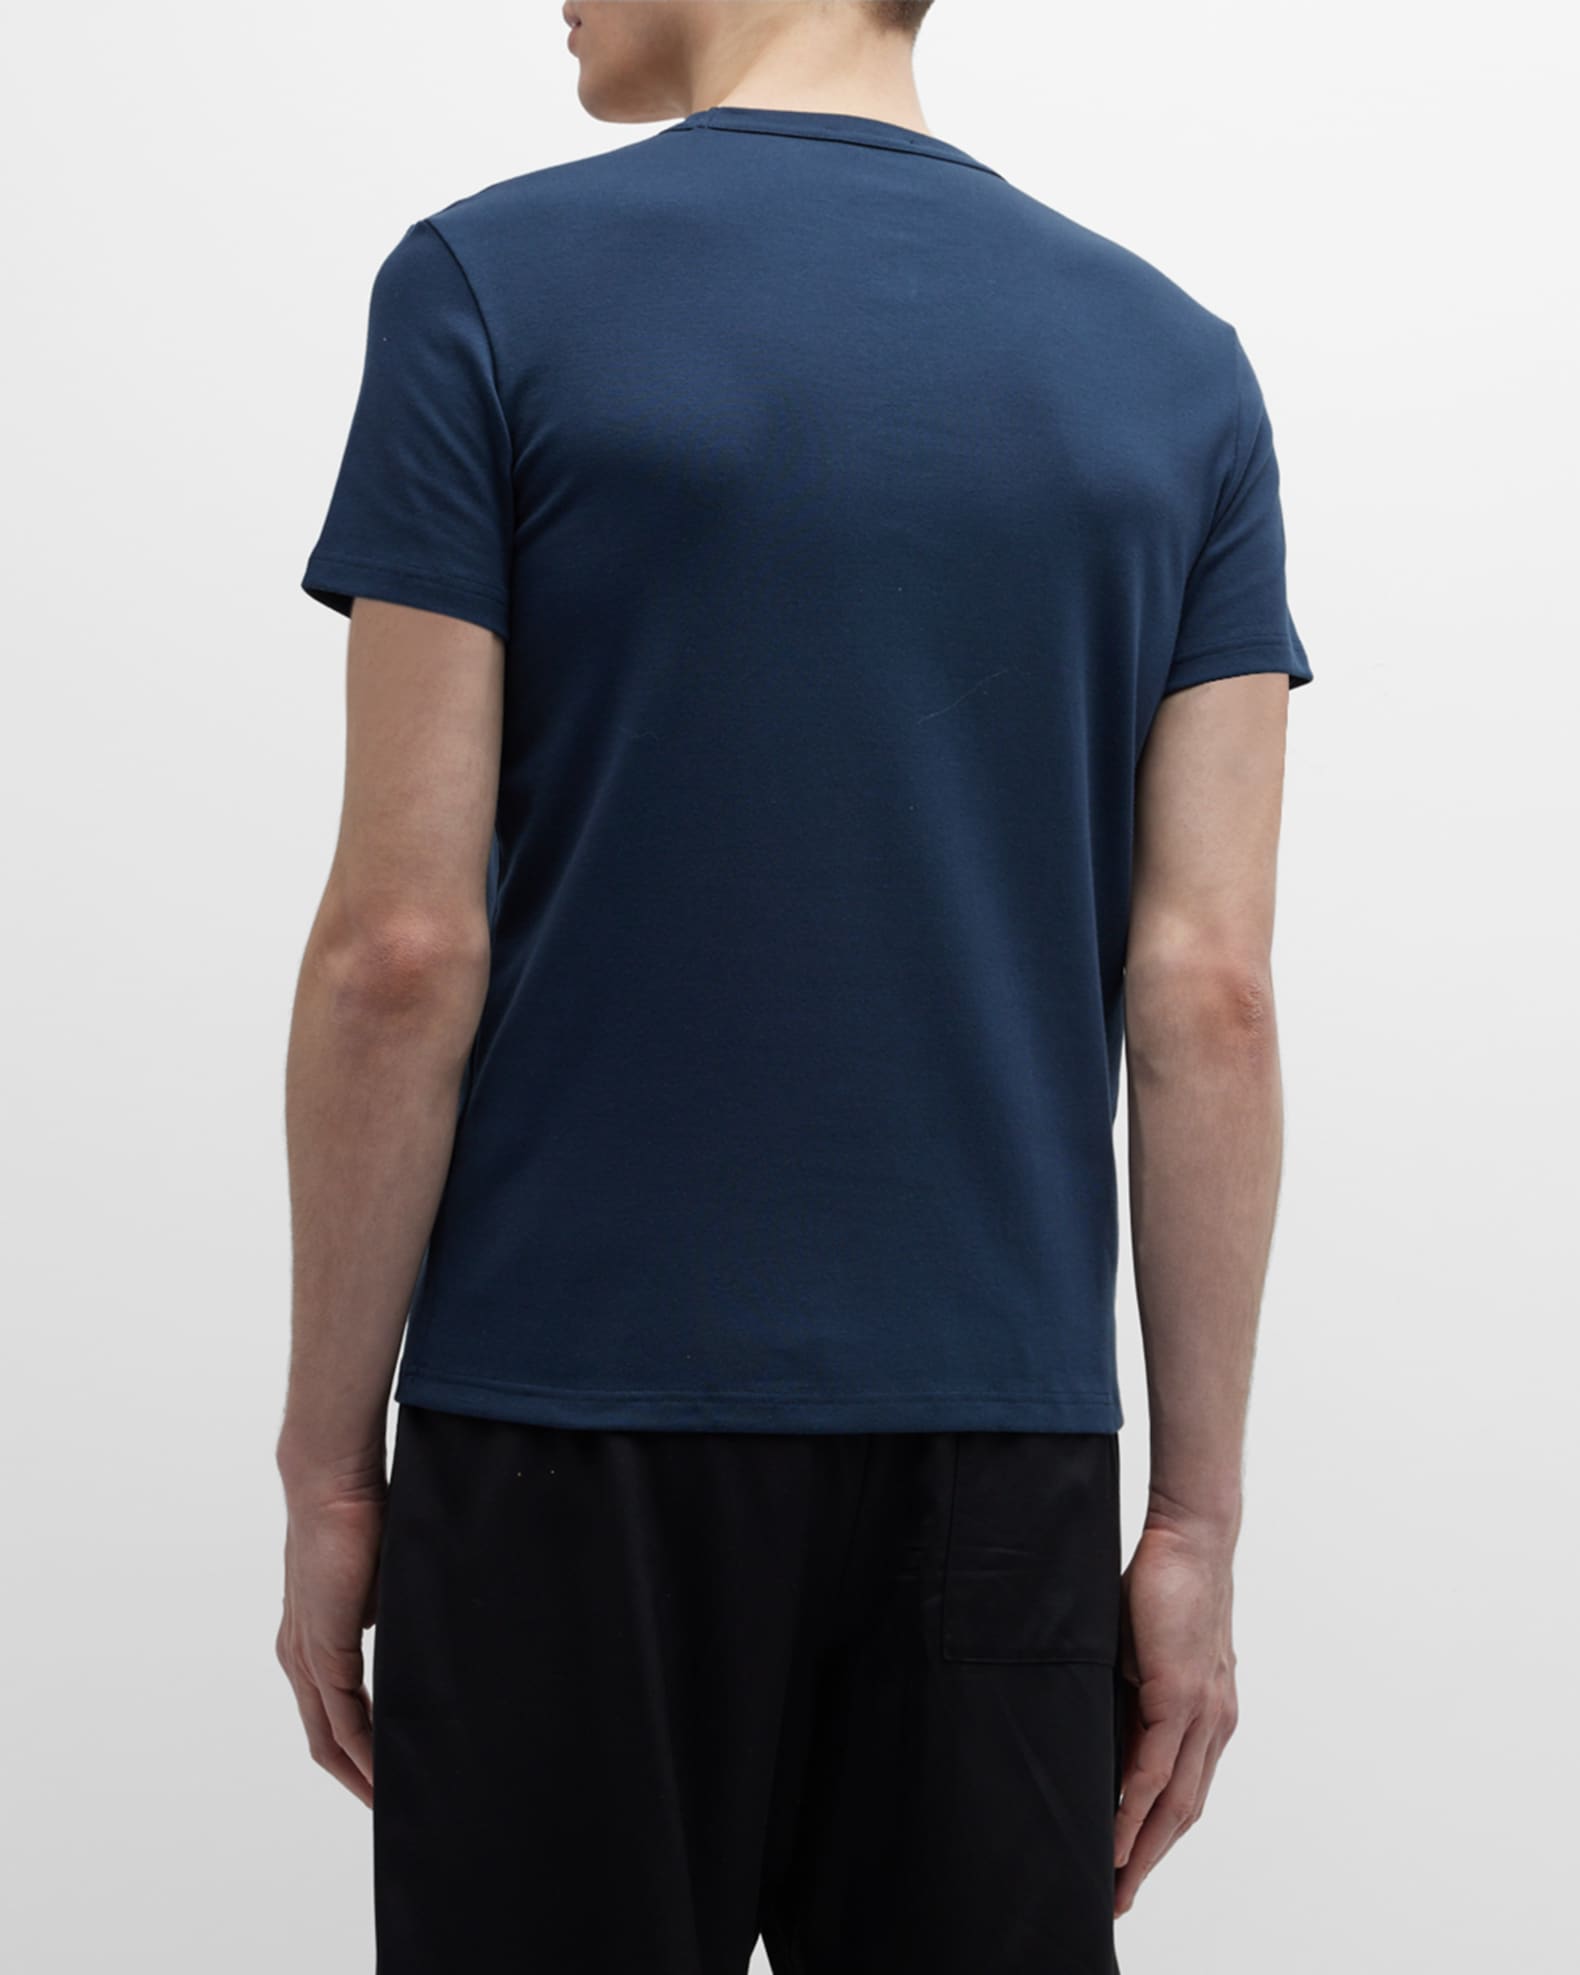 TOM FORD Men's Cotton Stretch Jersey T-shirt | Neiman Marcus